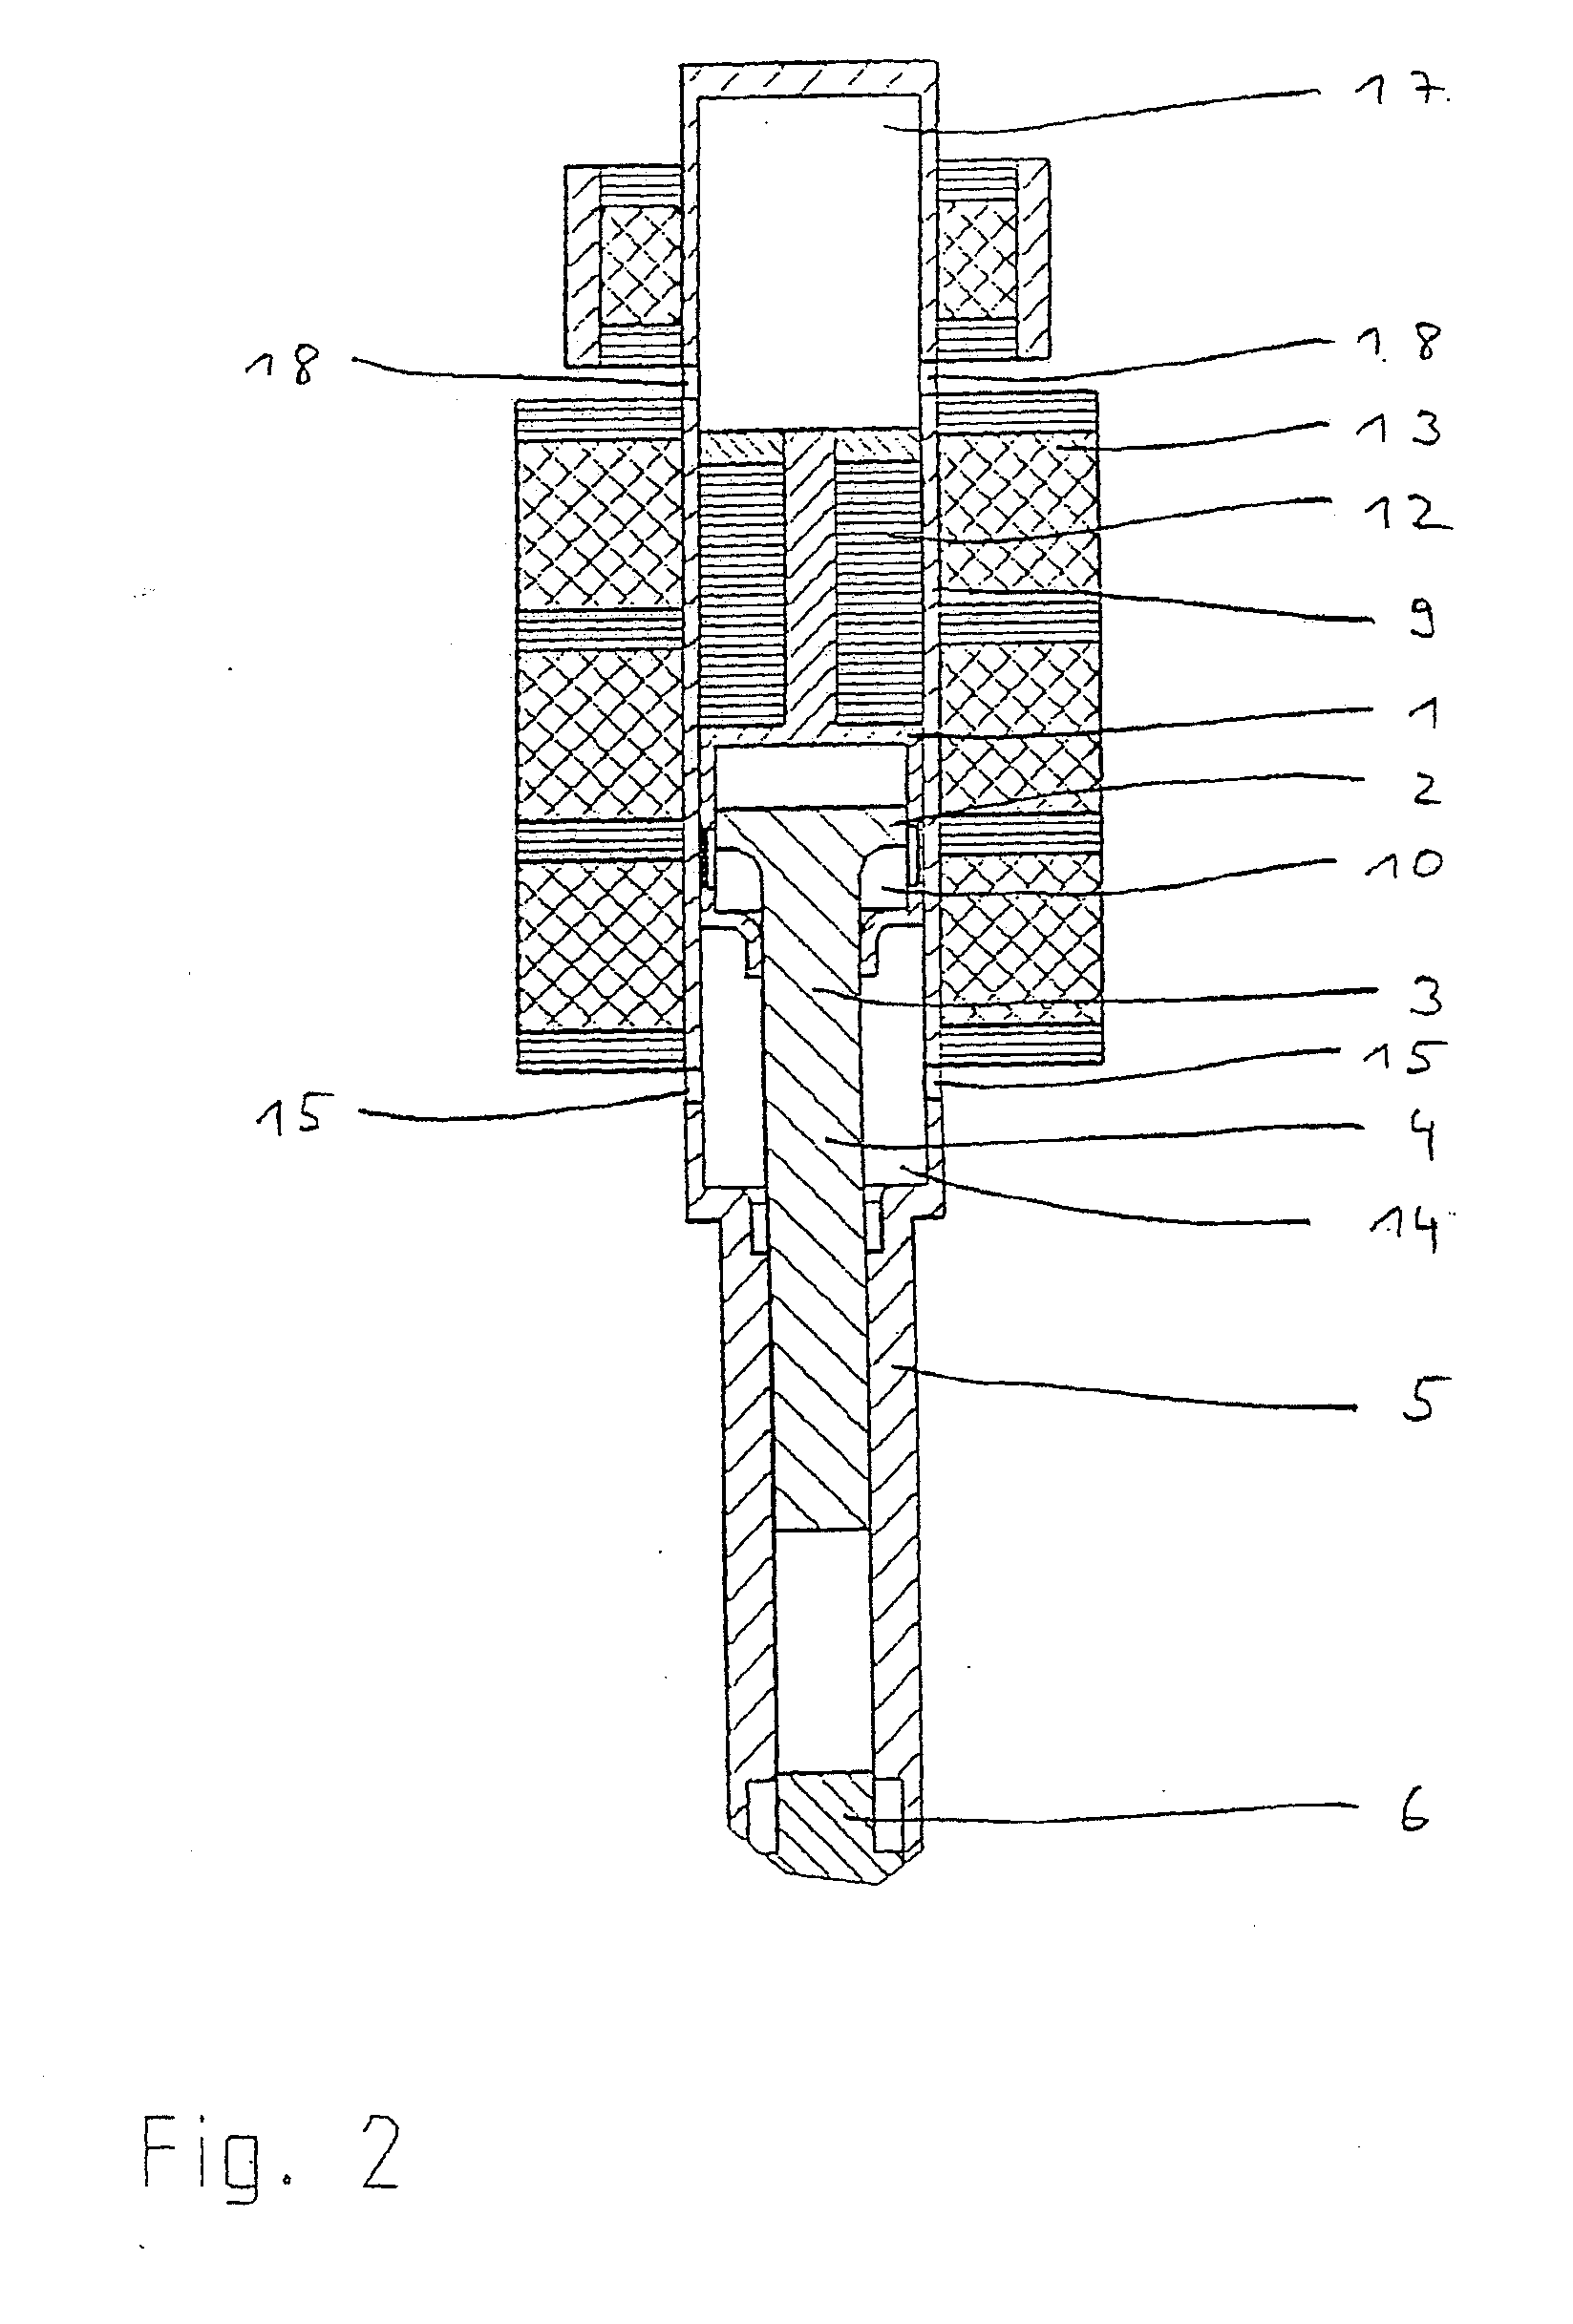 Percussive Mechanism with an Electrodynamic Linear Drive